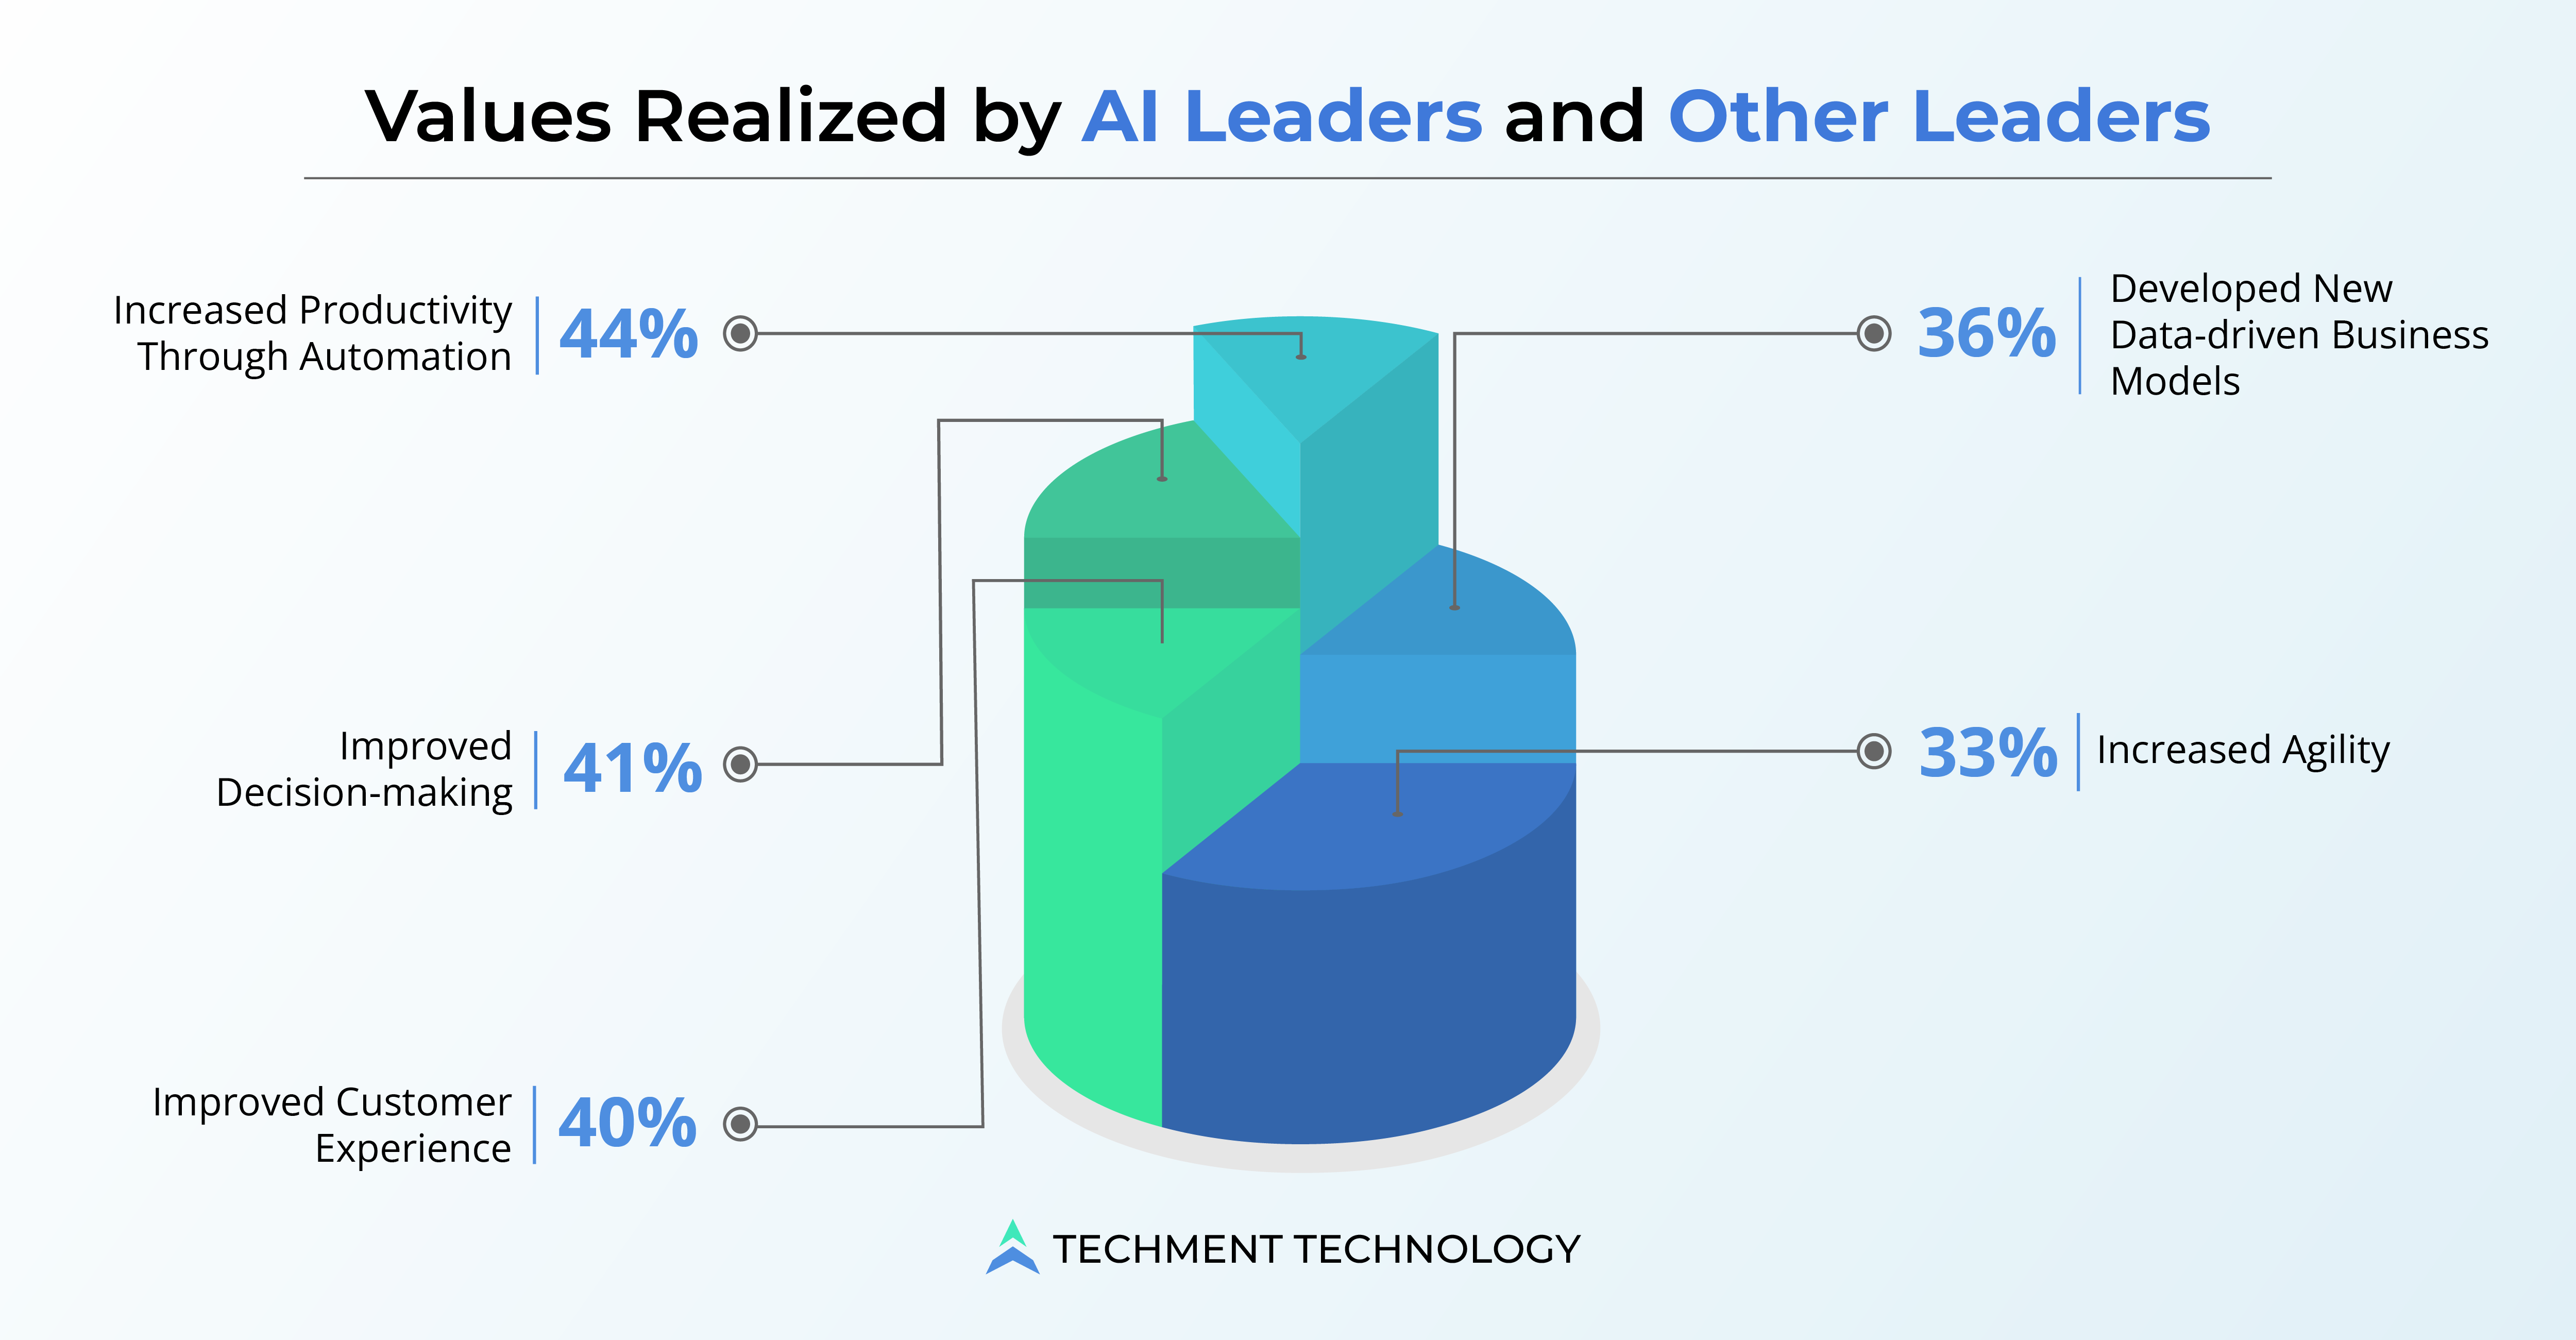 Values Realized by AI Leaders and Other Leaders